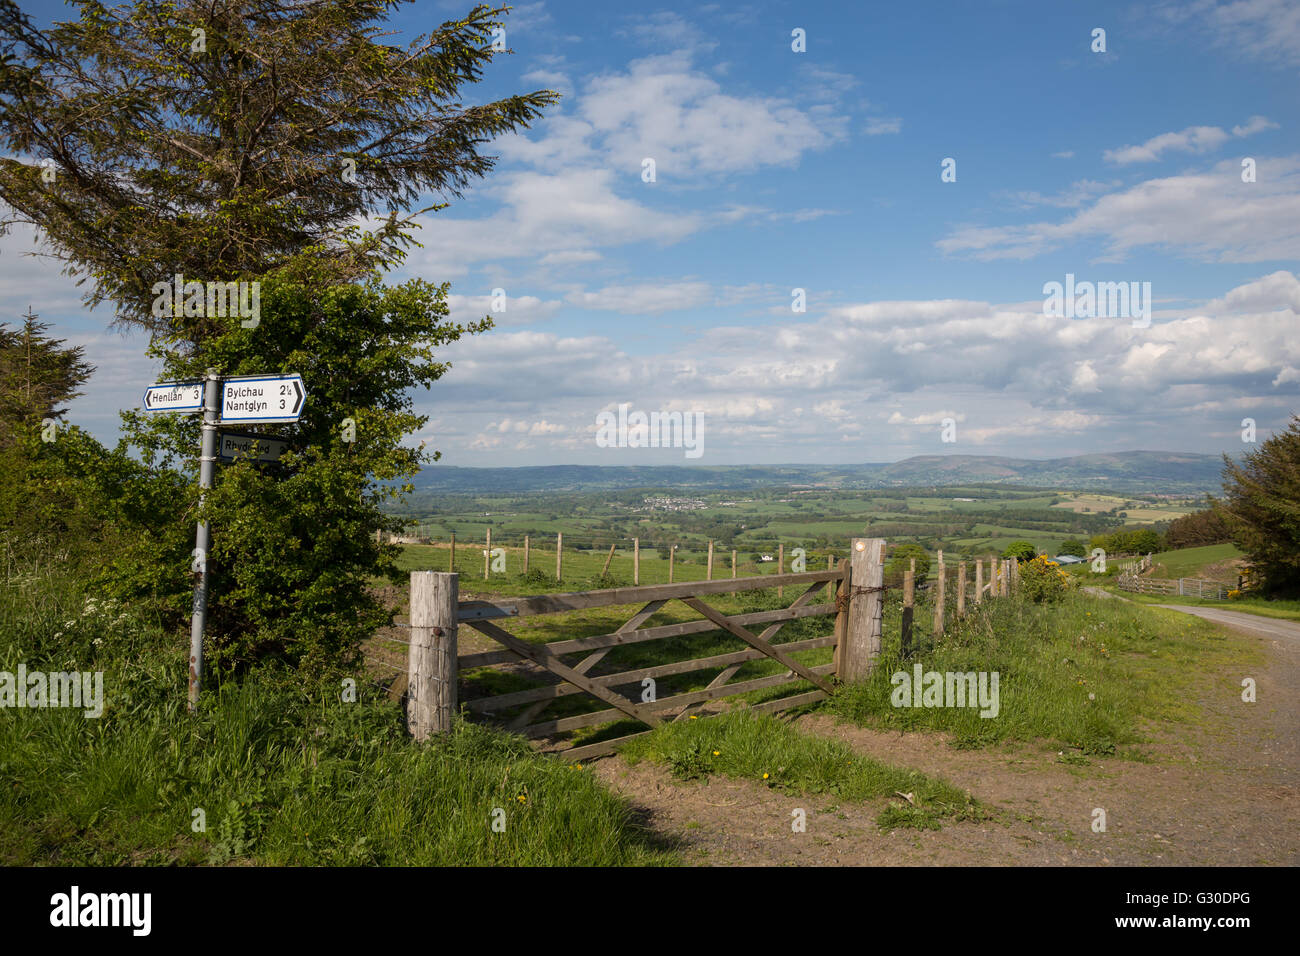 Signpost on a remote rural lane, for Bylchau, Nantglyn, Henllan, with the Vale of Clwyd in the distance Stock Photo